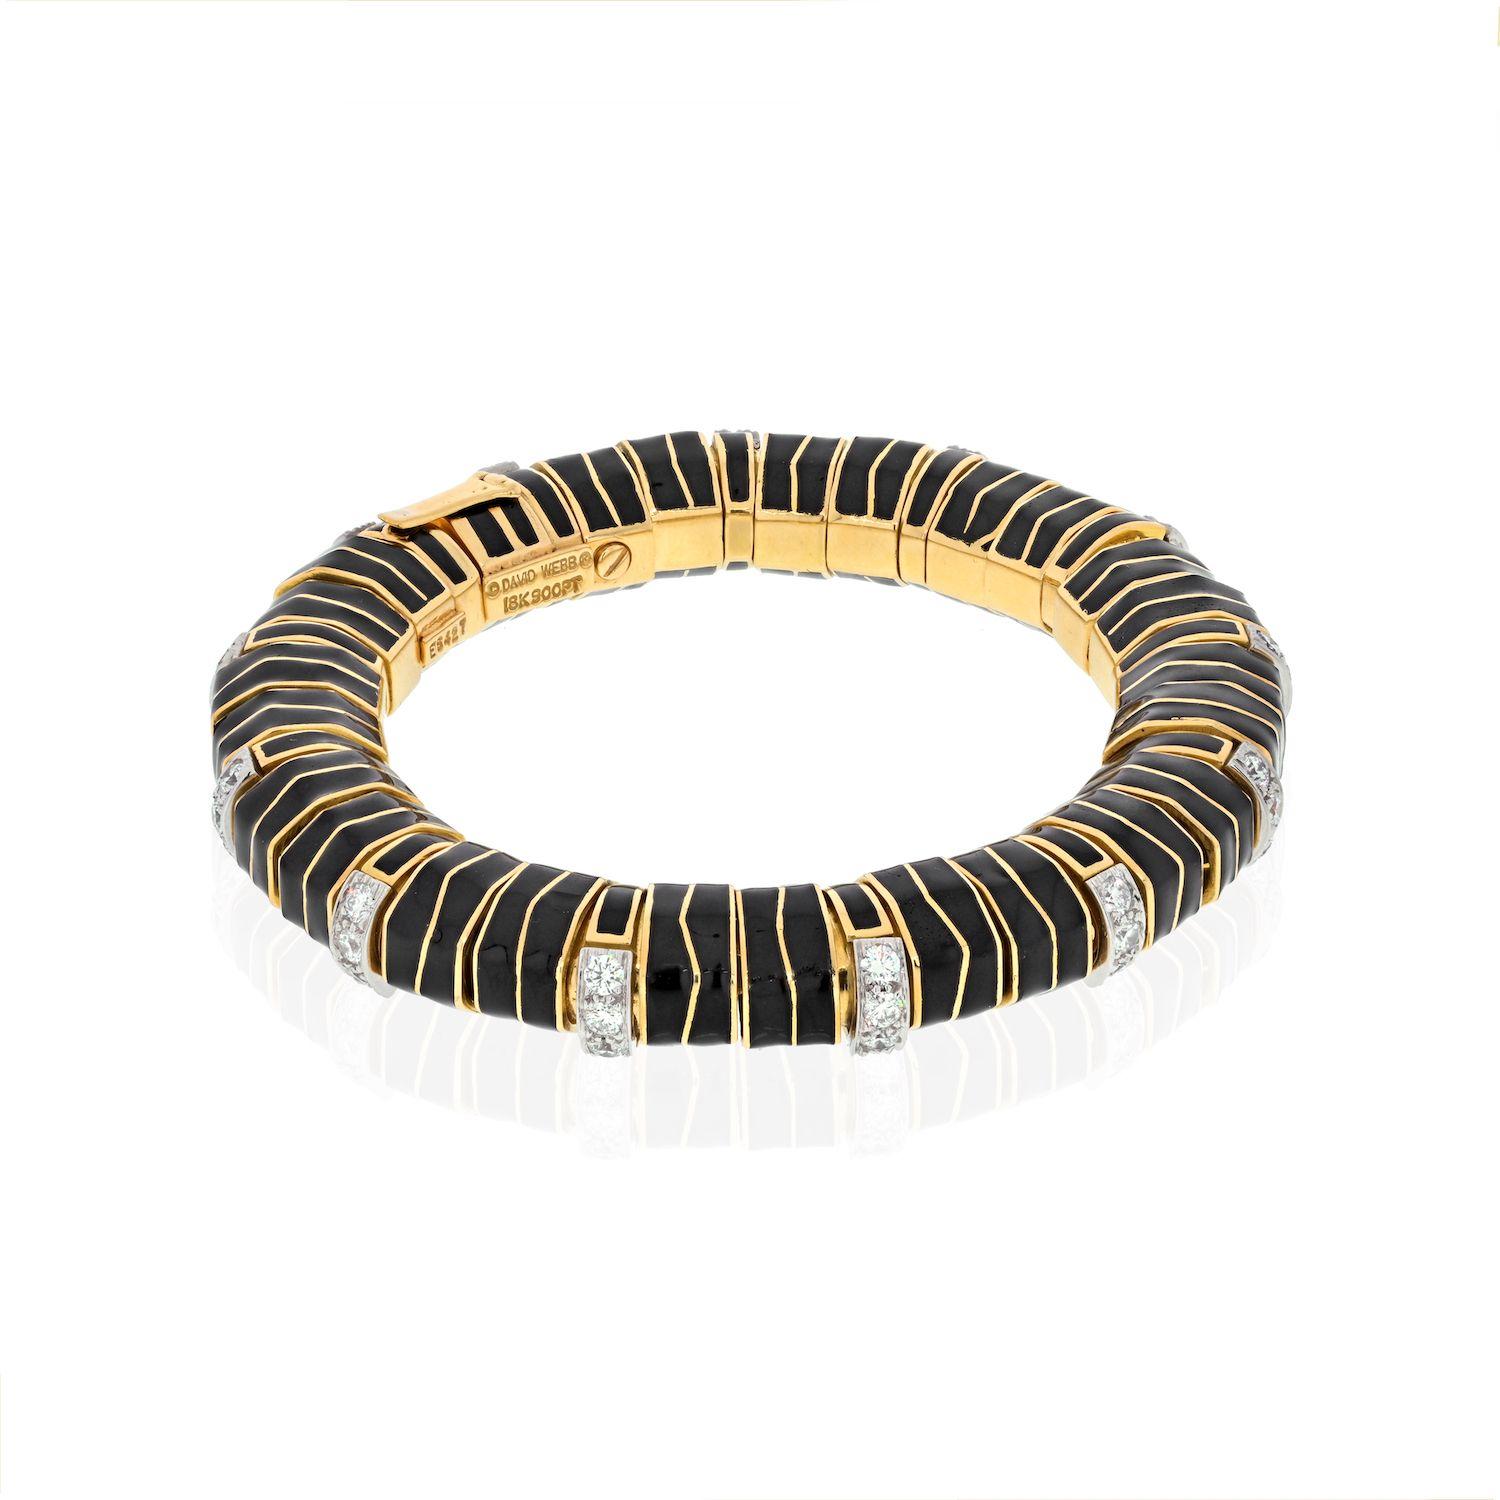 Gently flexible black enamel and diamond bangle by David Webb. Brilliant white diamonds pop from their styled golden links against a dramatic backdrop of black enamel. The piece is gently flexible on the wrist, yet maintains its circular form.